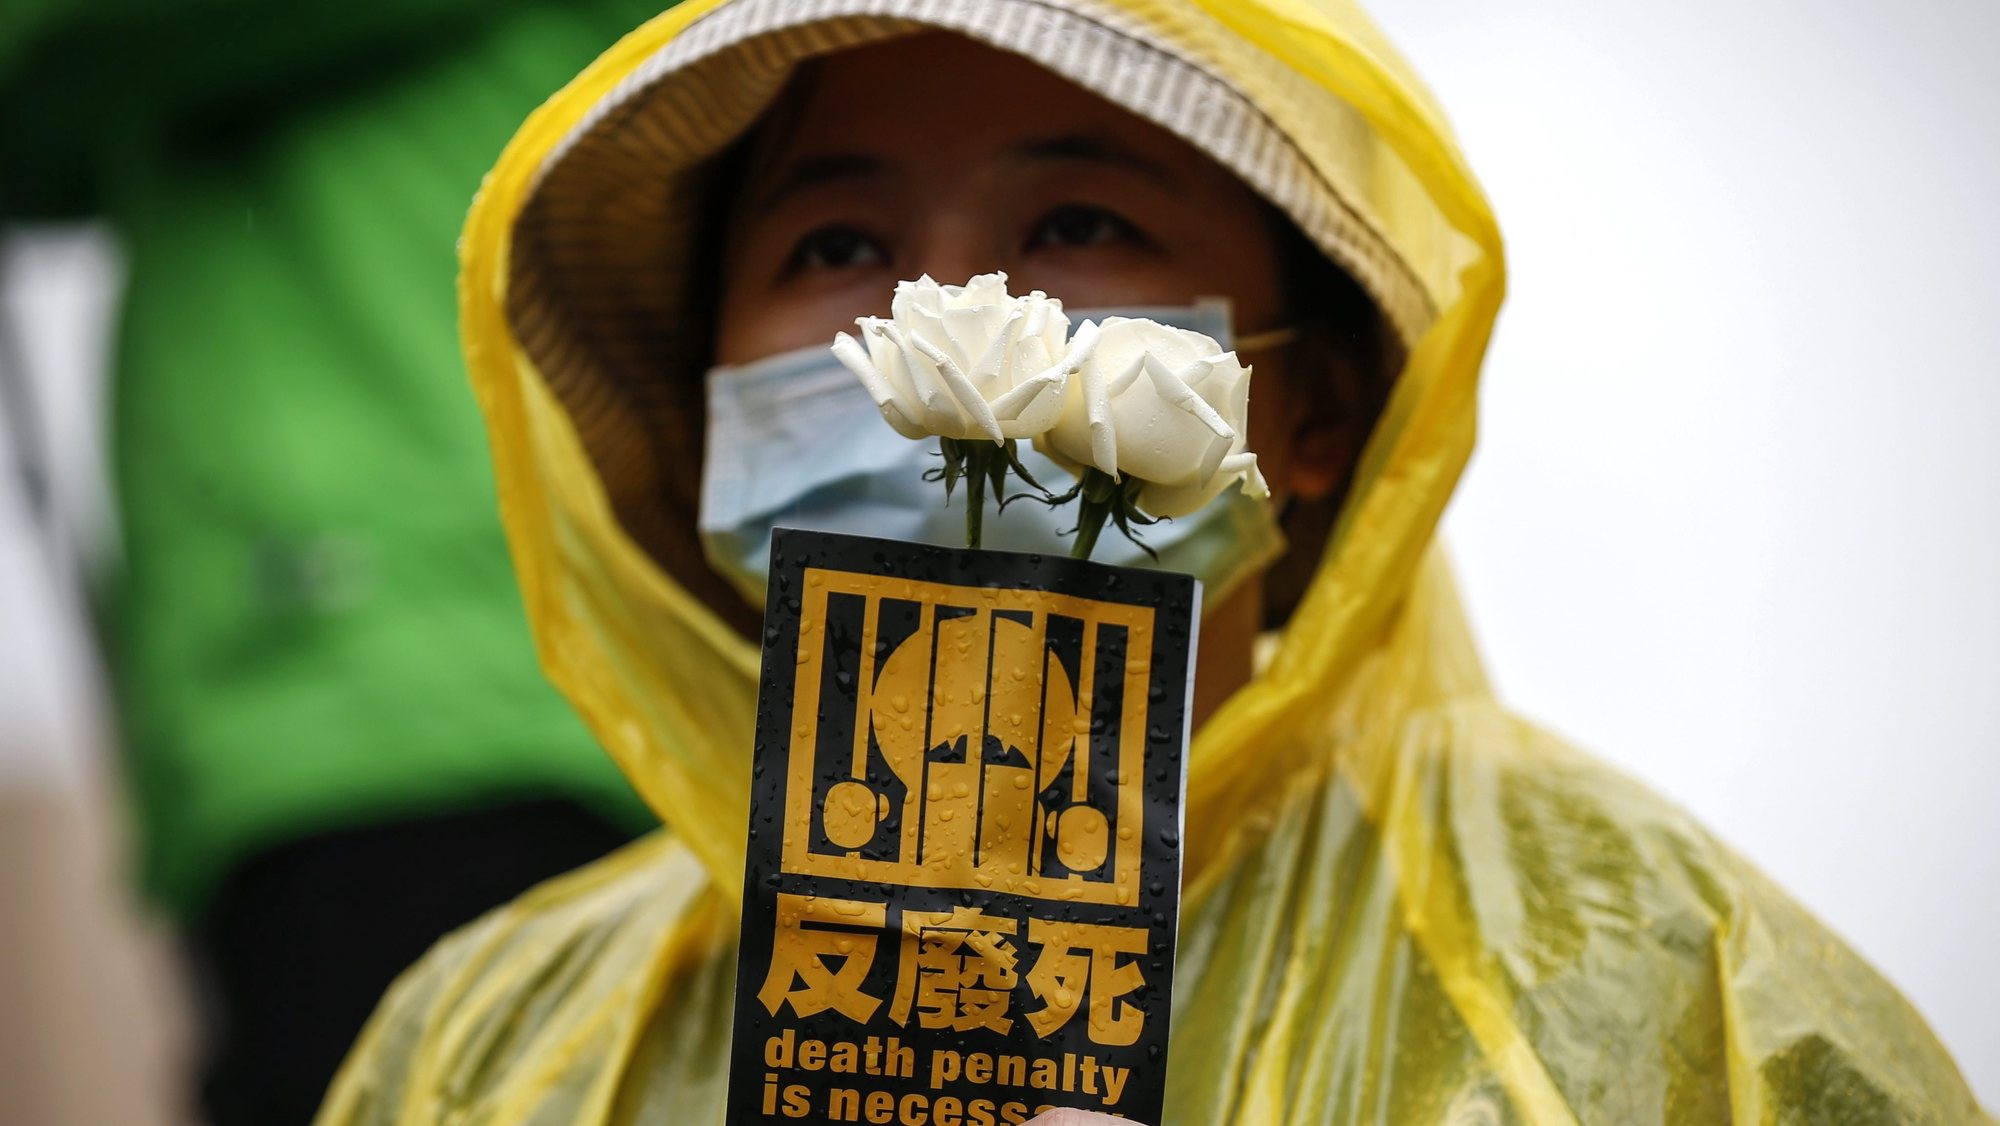 epa05252337 A protester shows a sticker during a protest in Taipei, Taiwan, 10 April 2016. Hundreds of protesters gathered at a street calling for the government action to reinforce death penalty after the beheading of a four-year-old toddler incident on 28 March 2016 in downtown Taipei.  EPA/RITCHIE B. TONGO